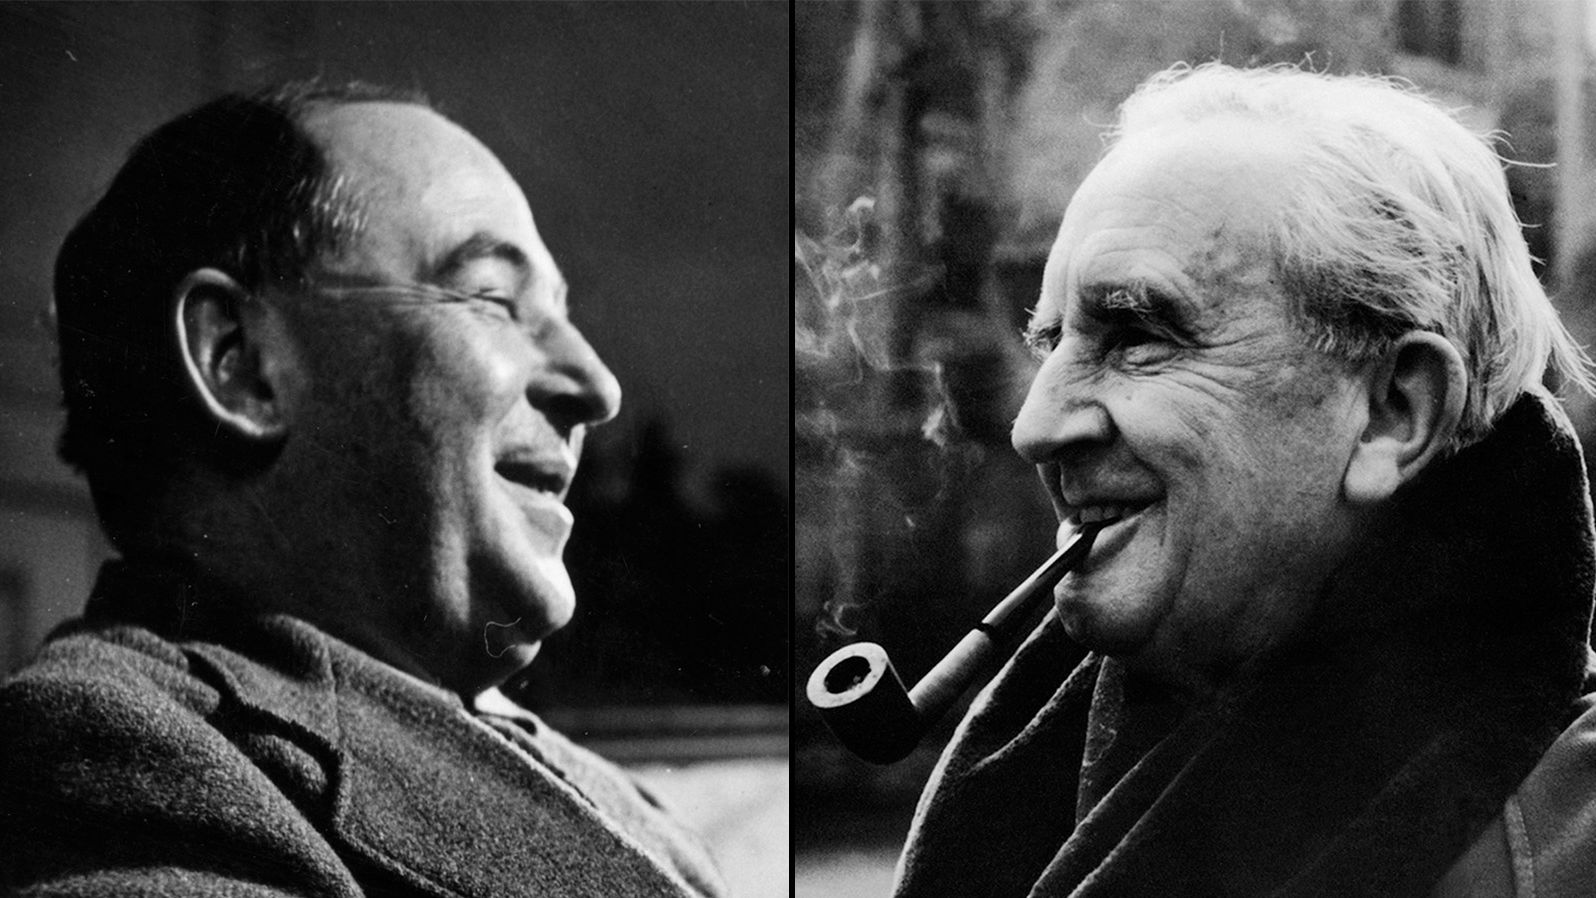 C.S. Lewis, left, and J.R.R. Tolkien both fought in the trenches in France.